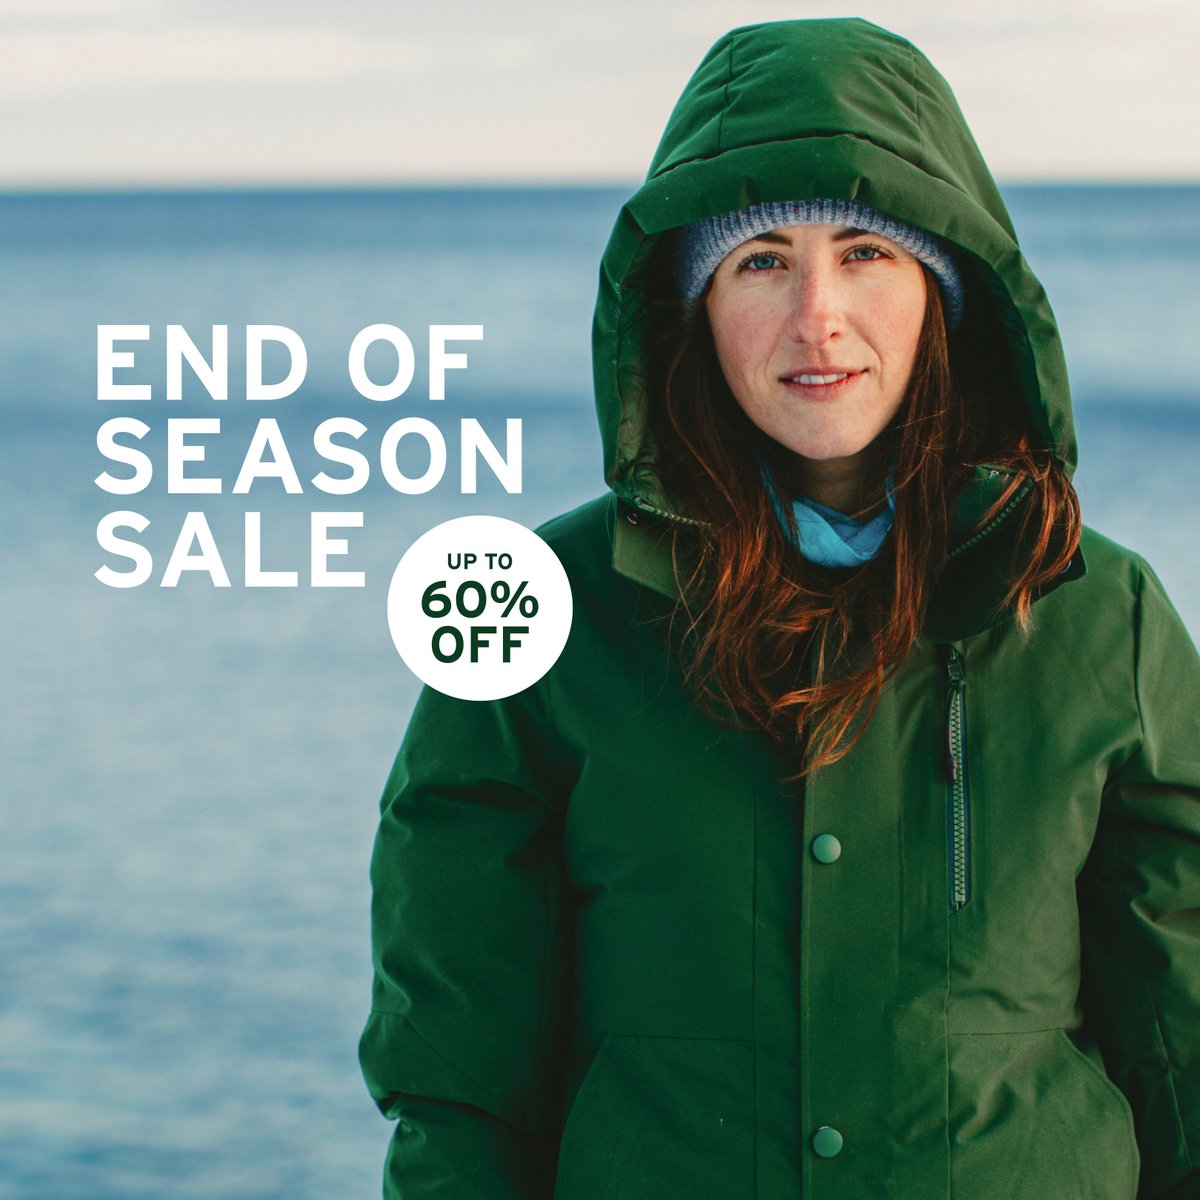 While it certainly still feels like winter, we can’t deny the inevitability of spring on the horizon. So, before the snow melts, we’re offering up to 60% off winter-ready gear – our best deal of the season. Shop now: askovfinlayson.com/sale